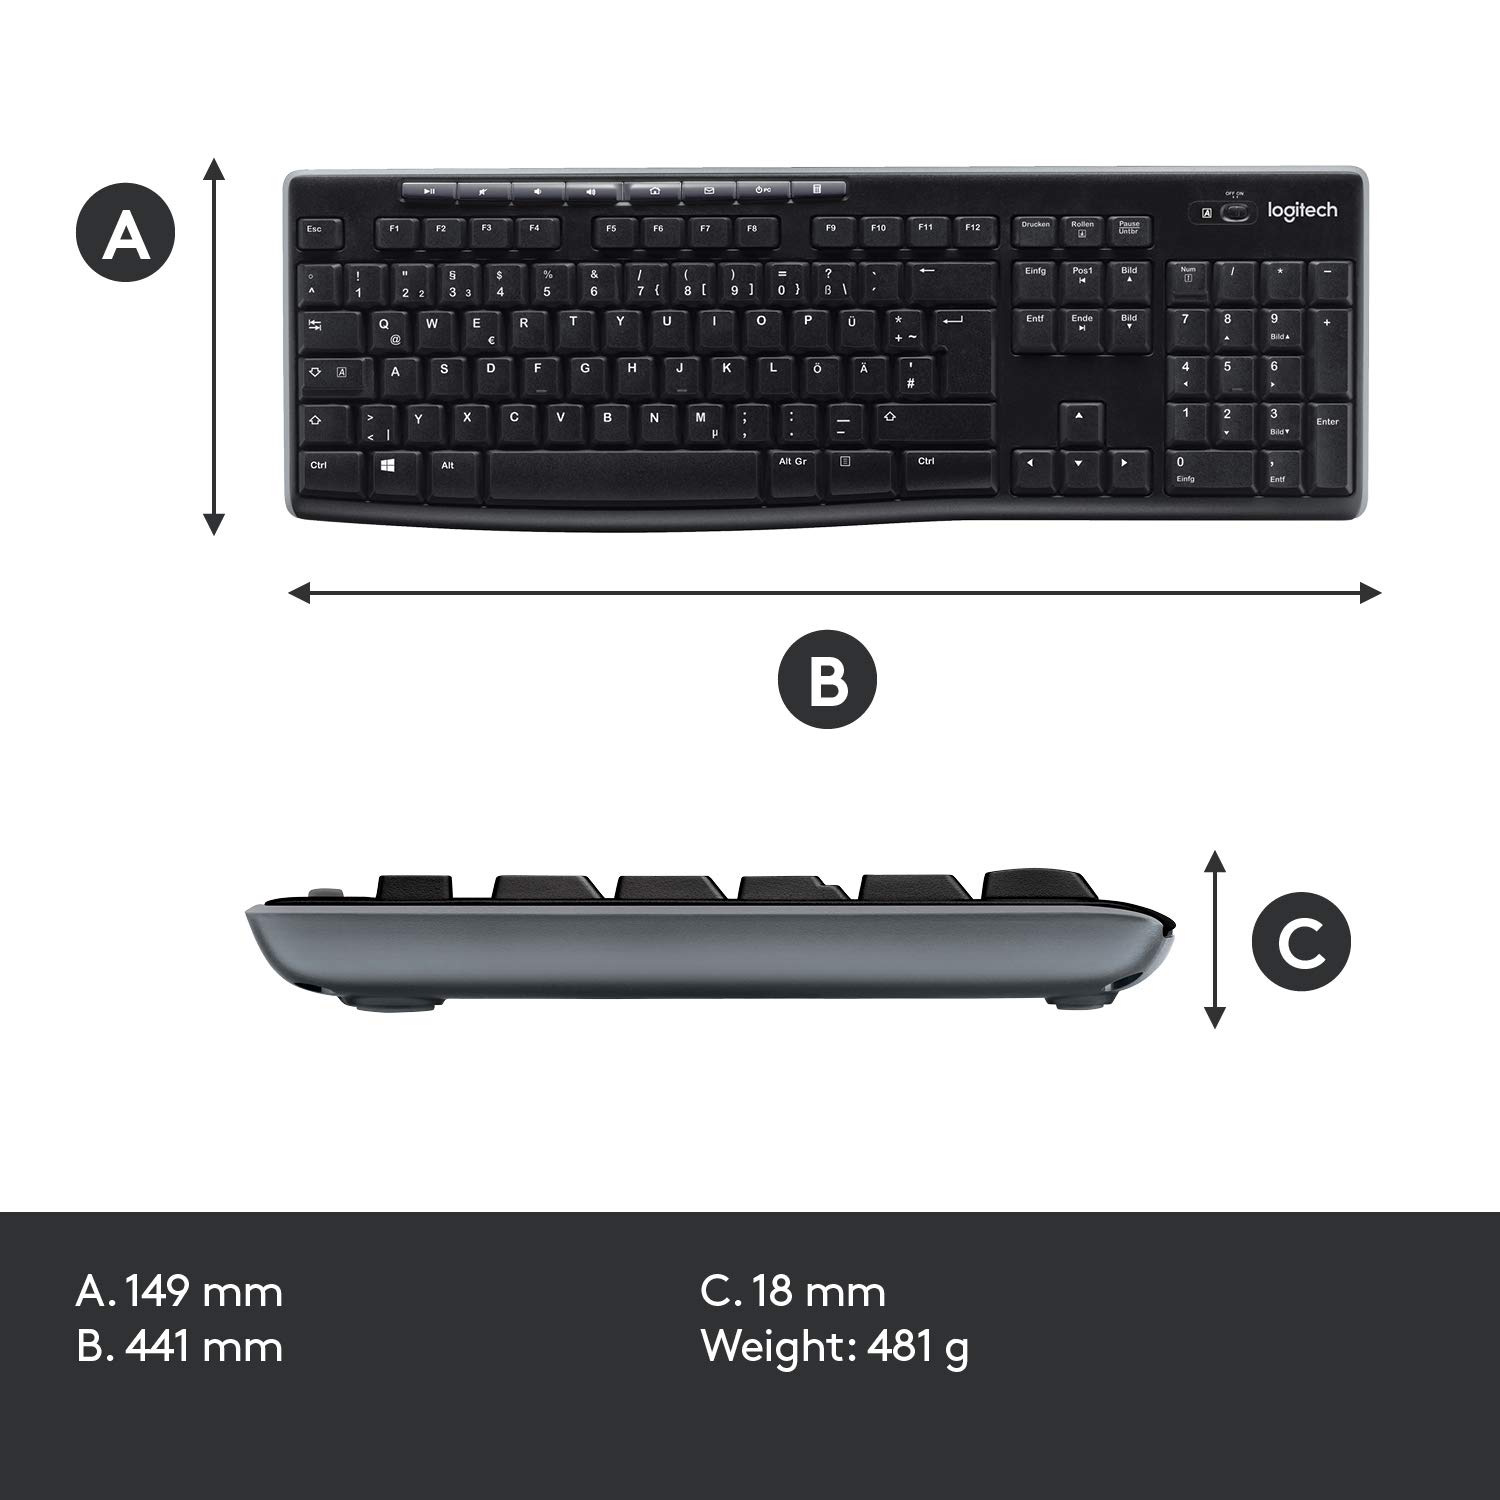 Logitech MK270 Wireless Keyboard and Mouse Combo — Keyboard and Mouse Included